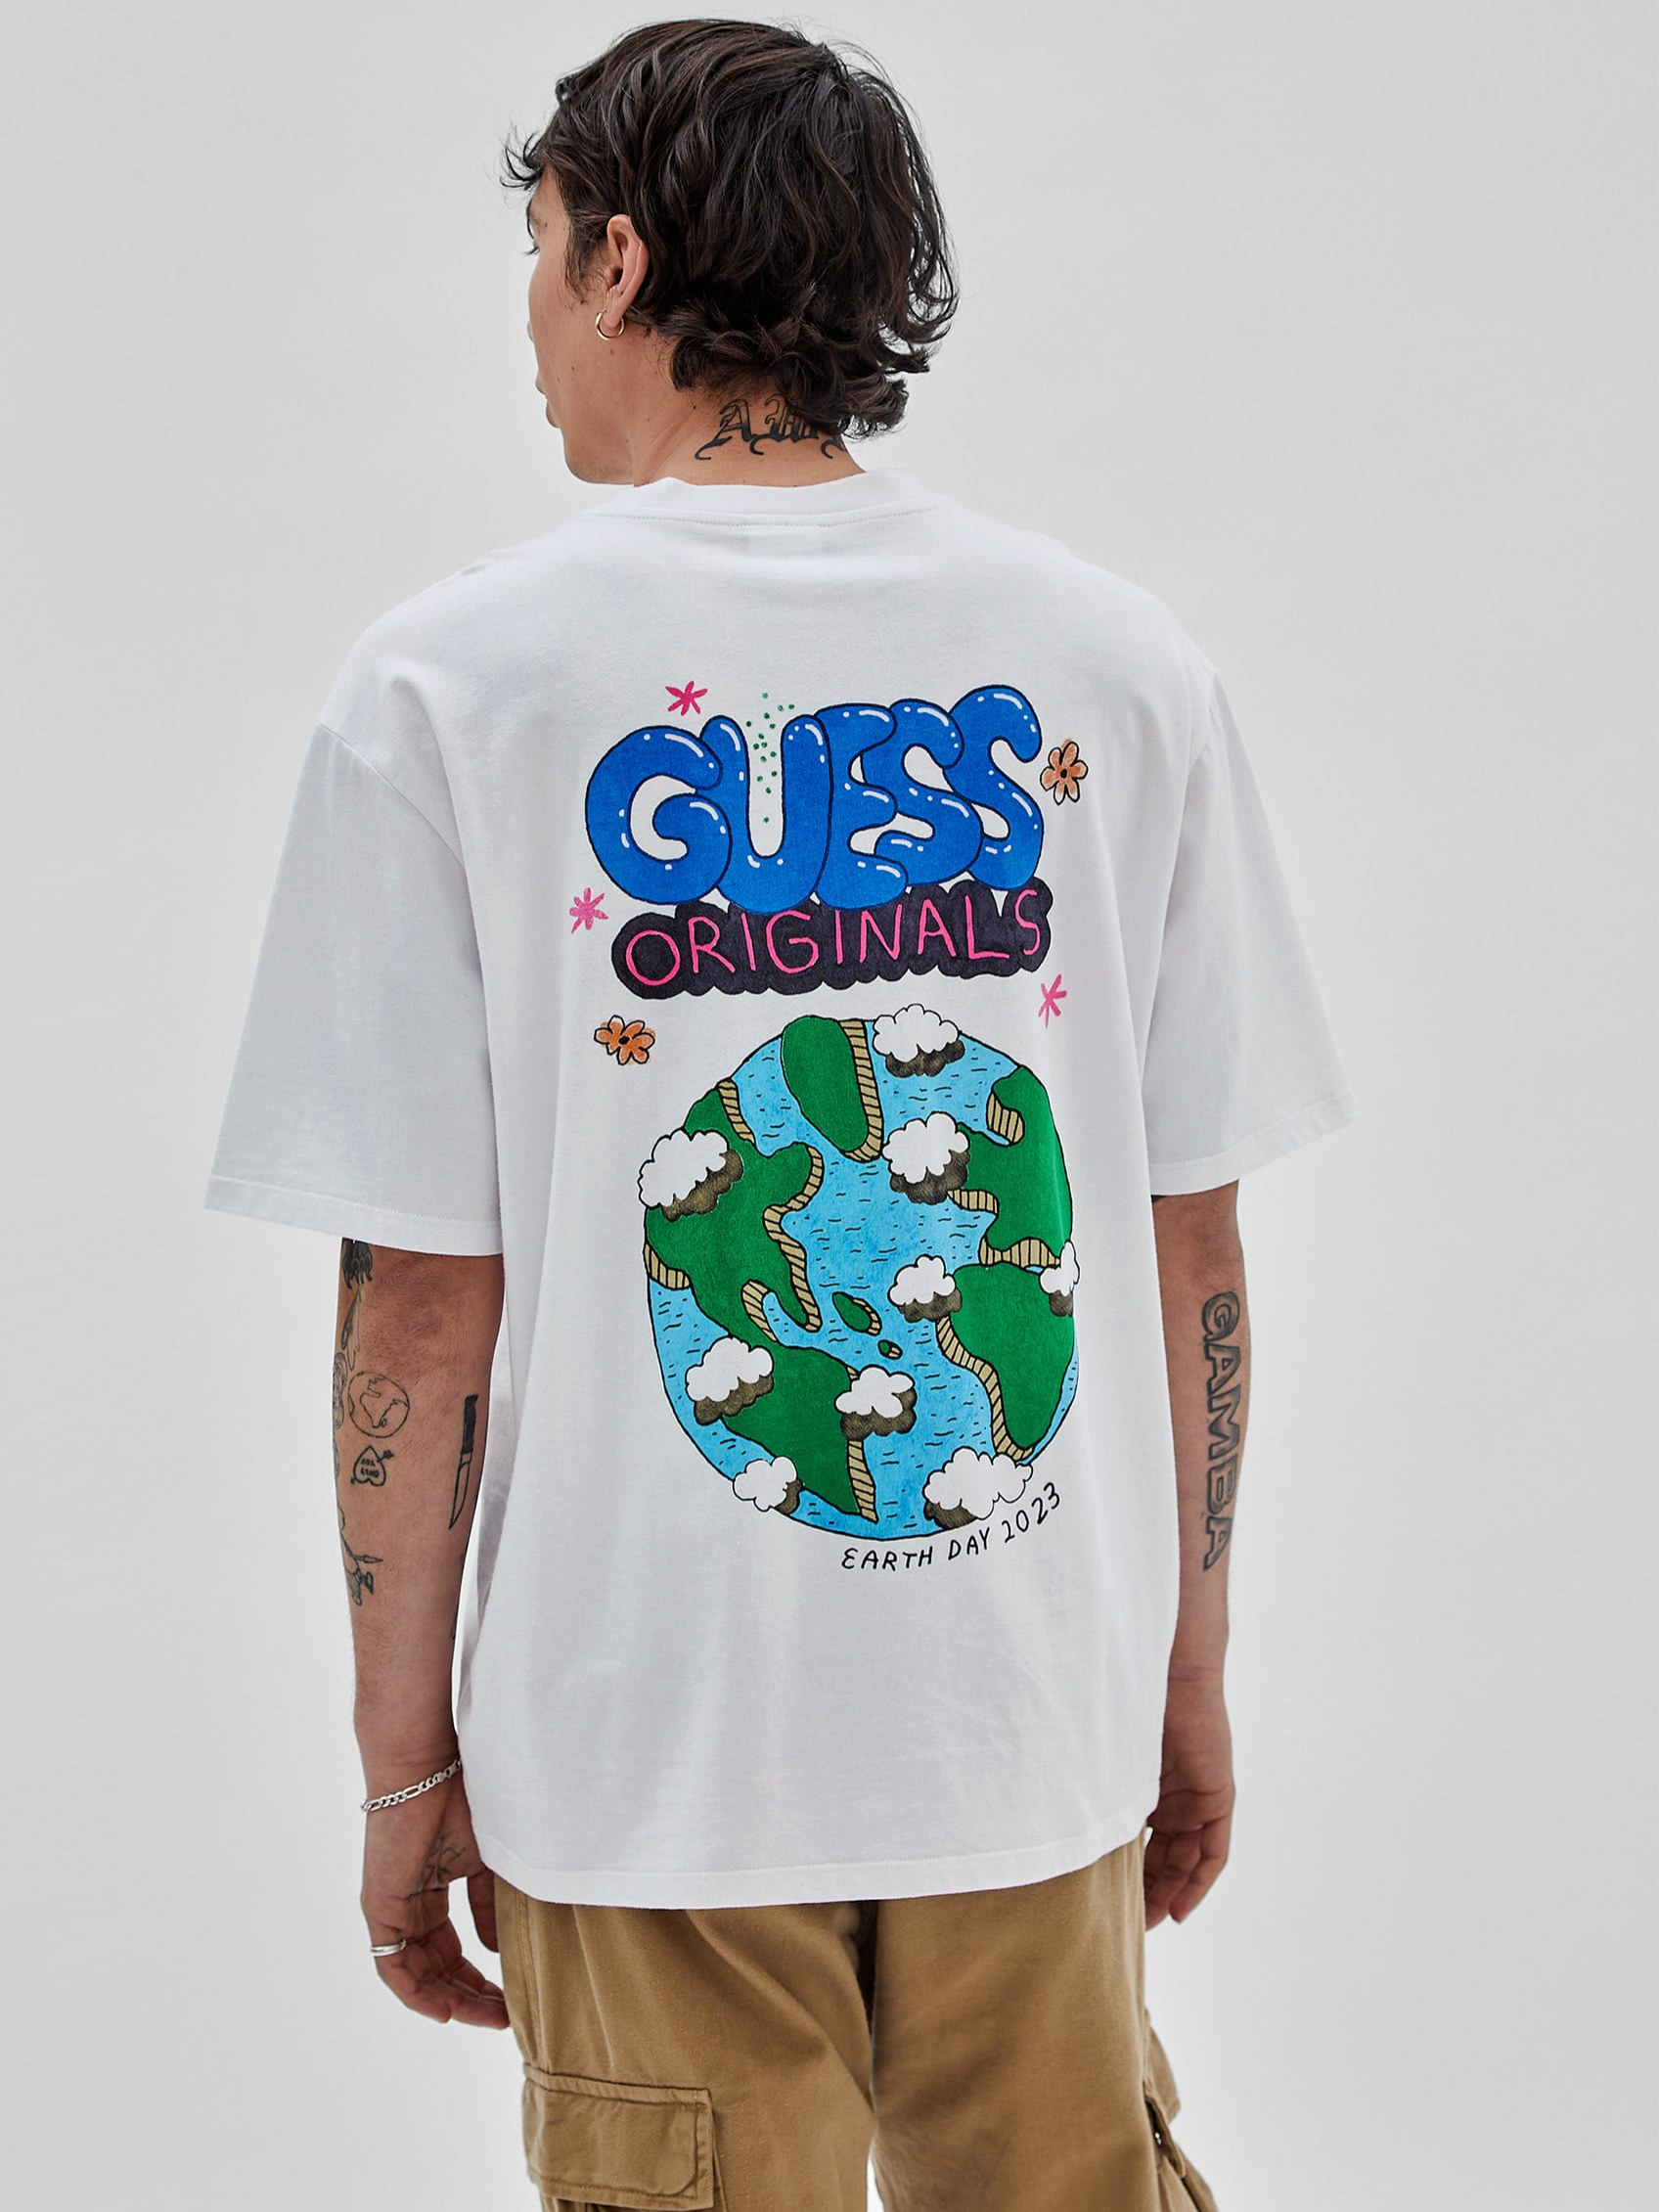 GUESS Originals x EARTH DAY PLANET TEE | Guess Philippines